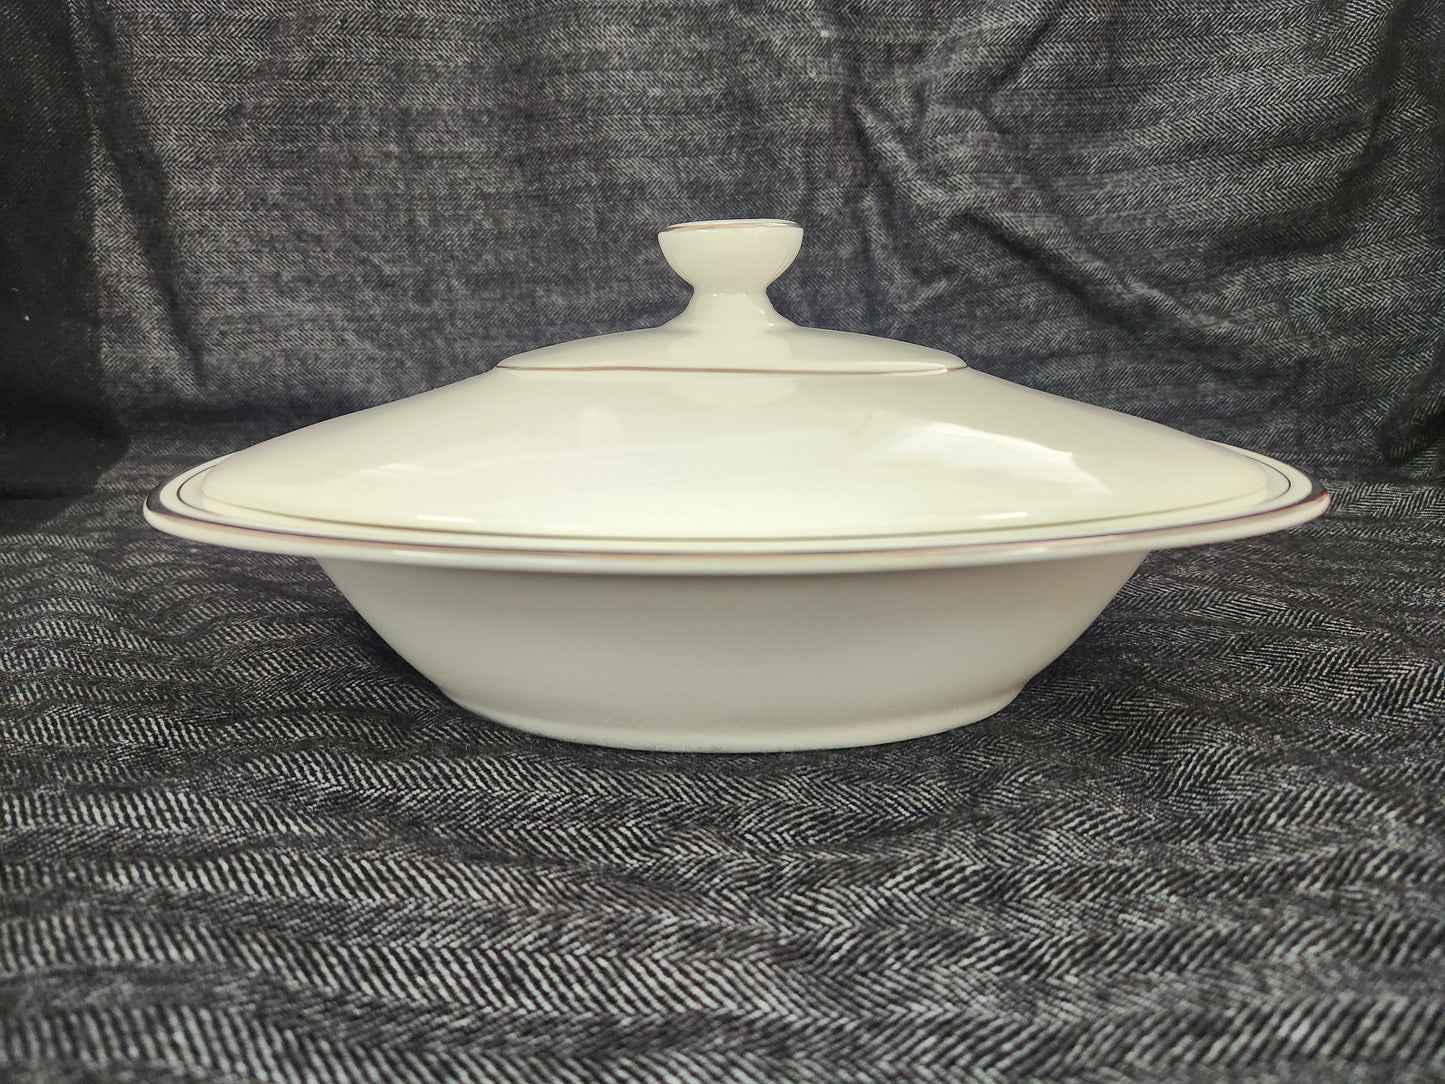 Concord Platinum 11" Oval Vegetable Bowl w/Lid by Royal Doulton - #H5048